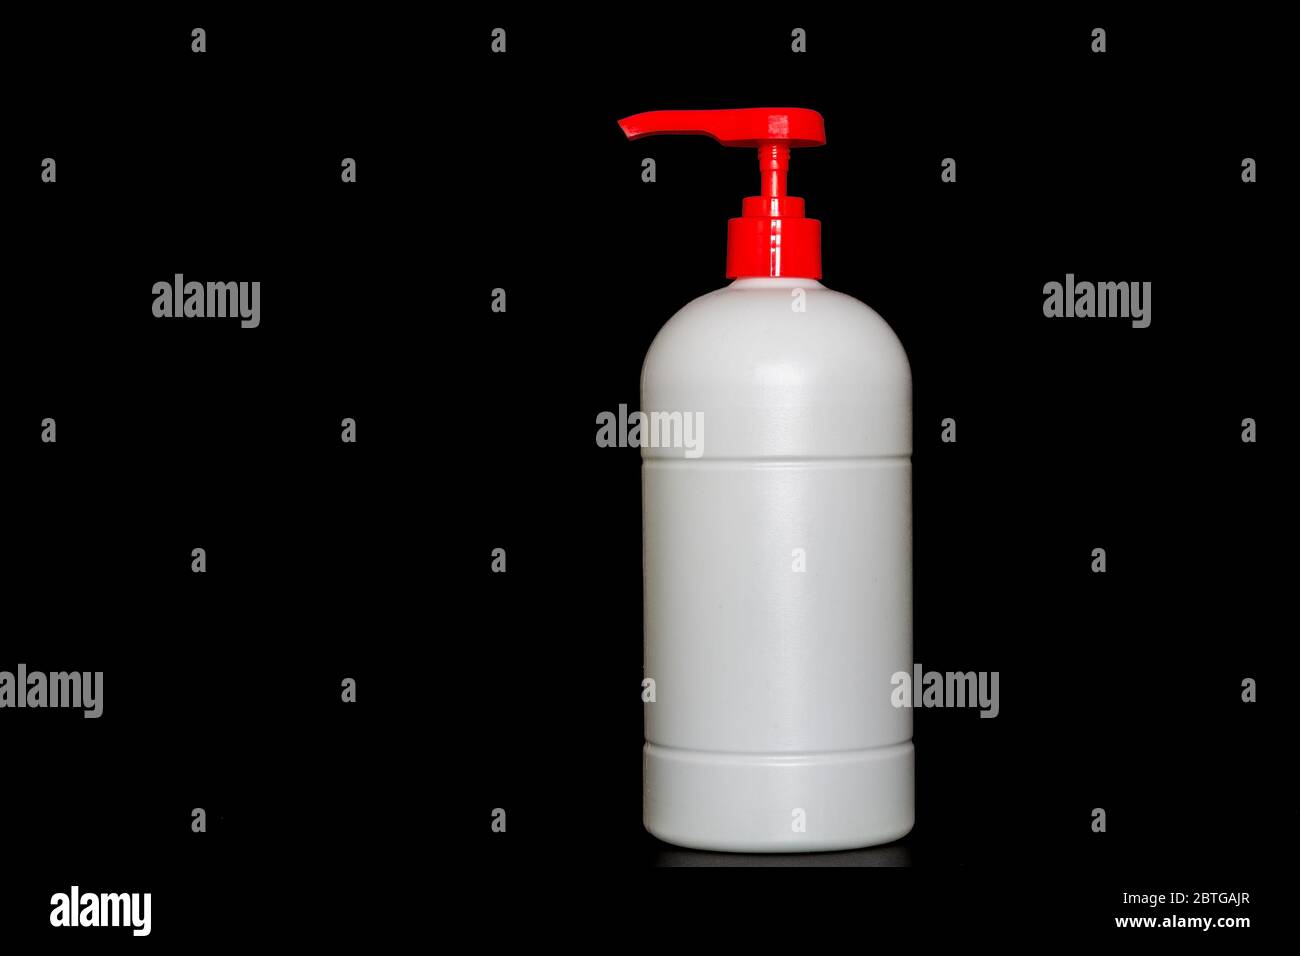 White plastic pushing pump bottle isolated on black background, copy space advertising text area Stock Photo